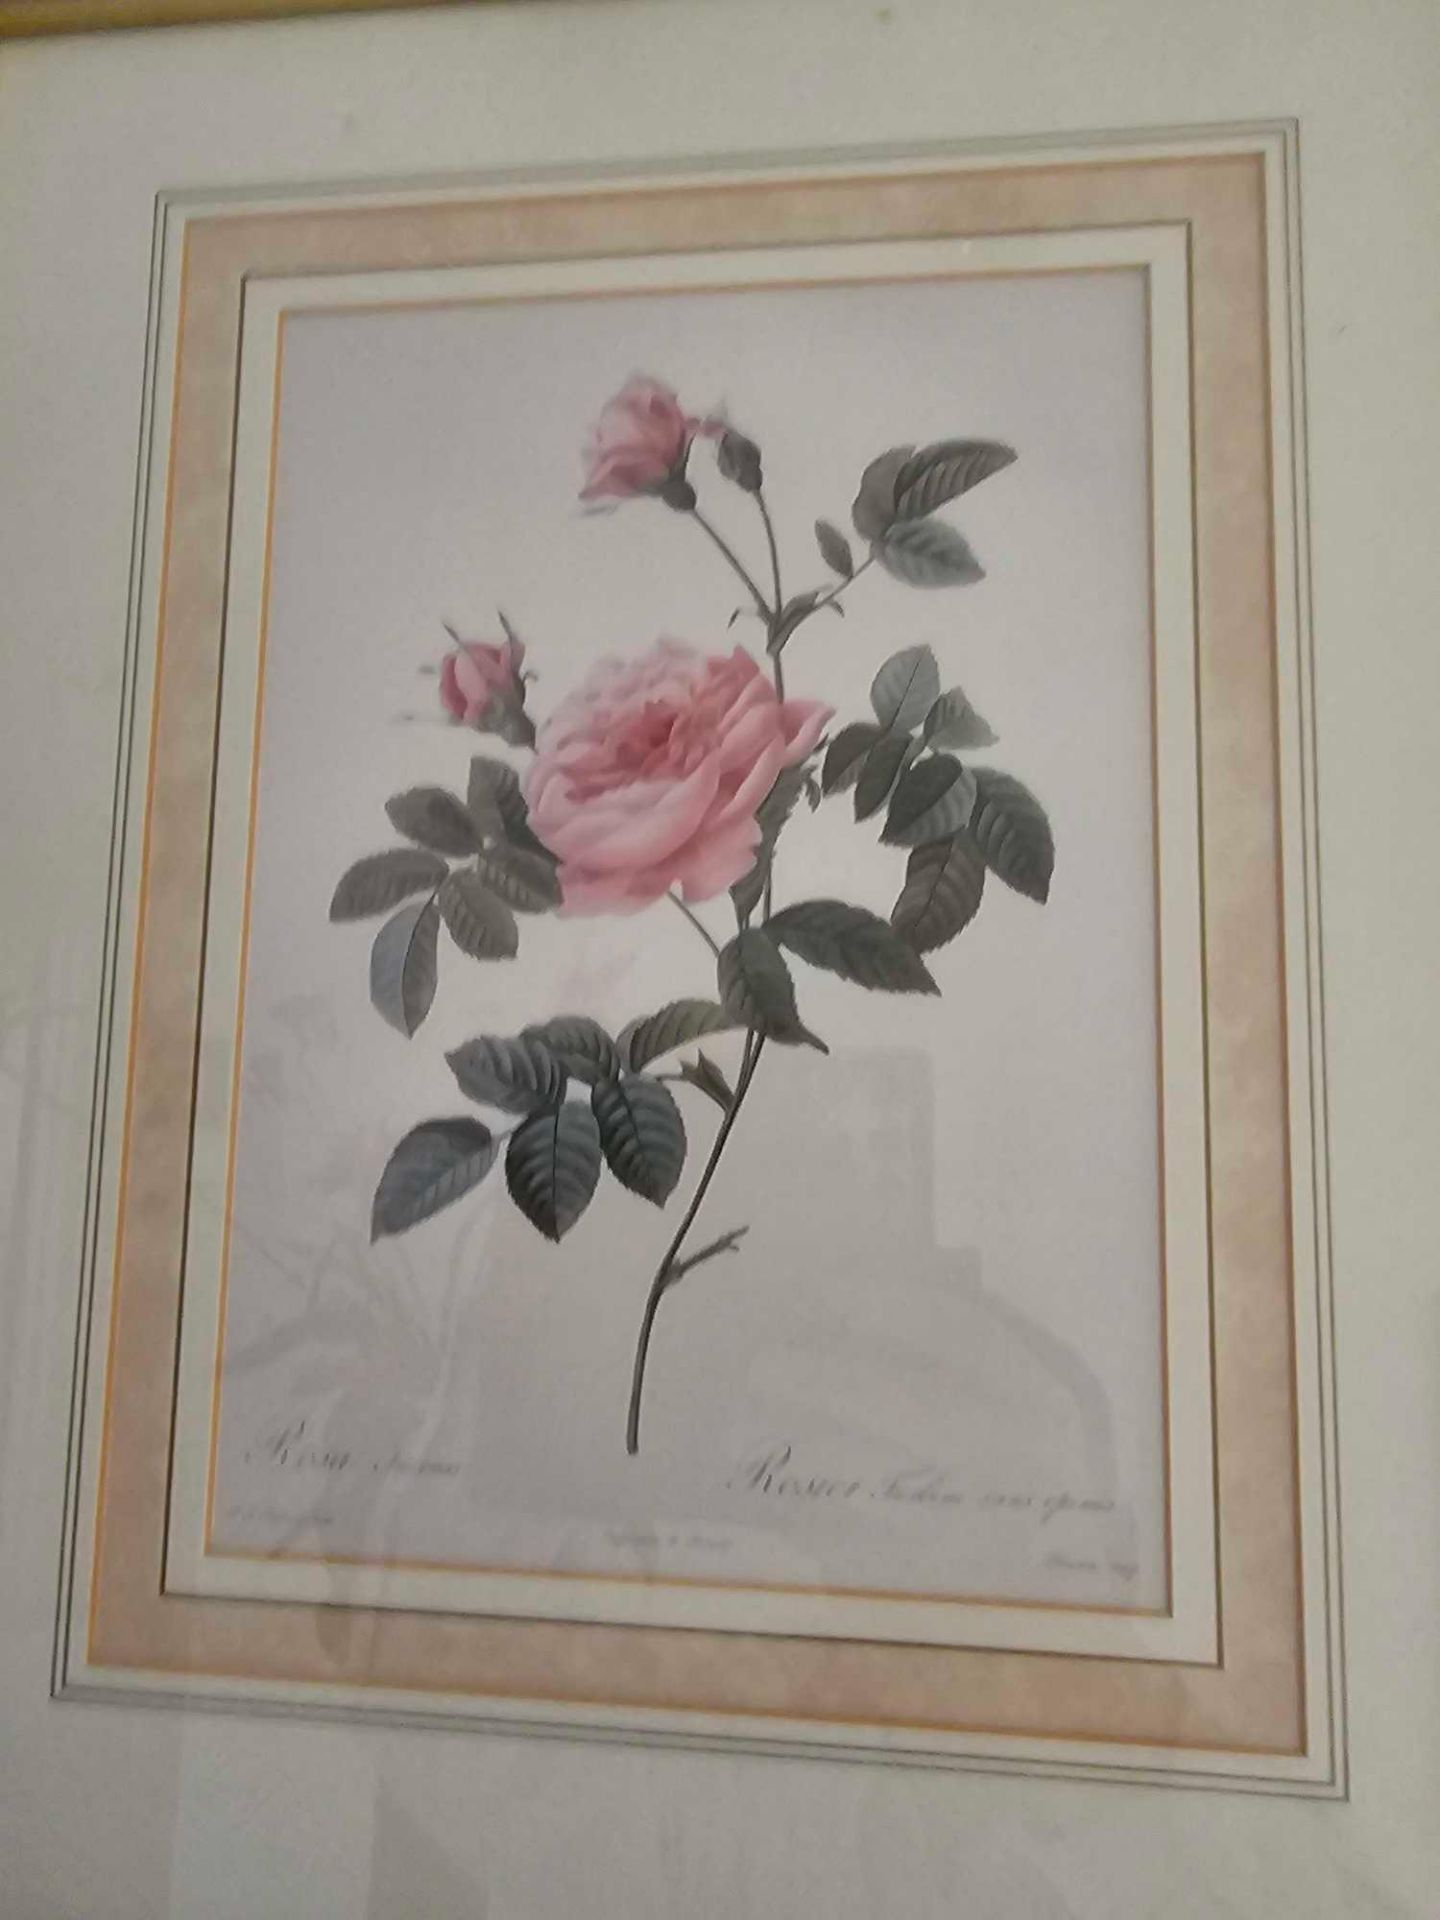 A Set Of Six Framed Rose Engraving Prints From Redoutes Les Roses (Paris 1817-1824) Each Framed 38 X - Image 7 of 7